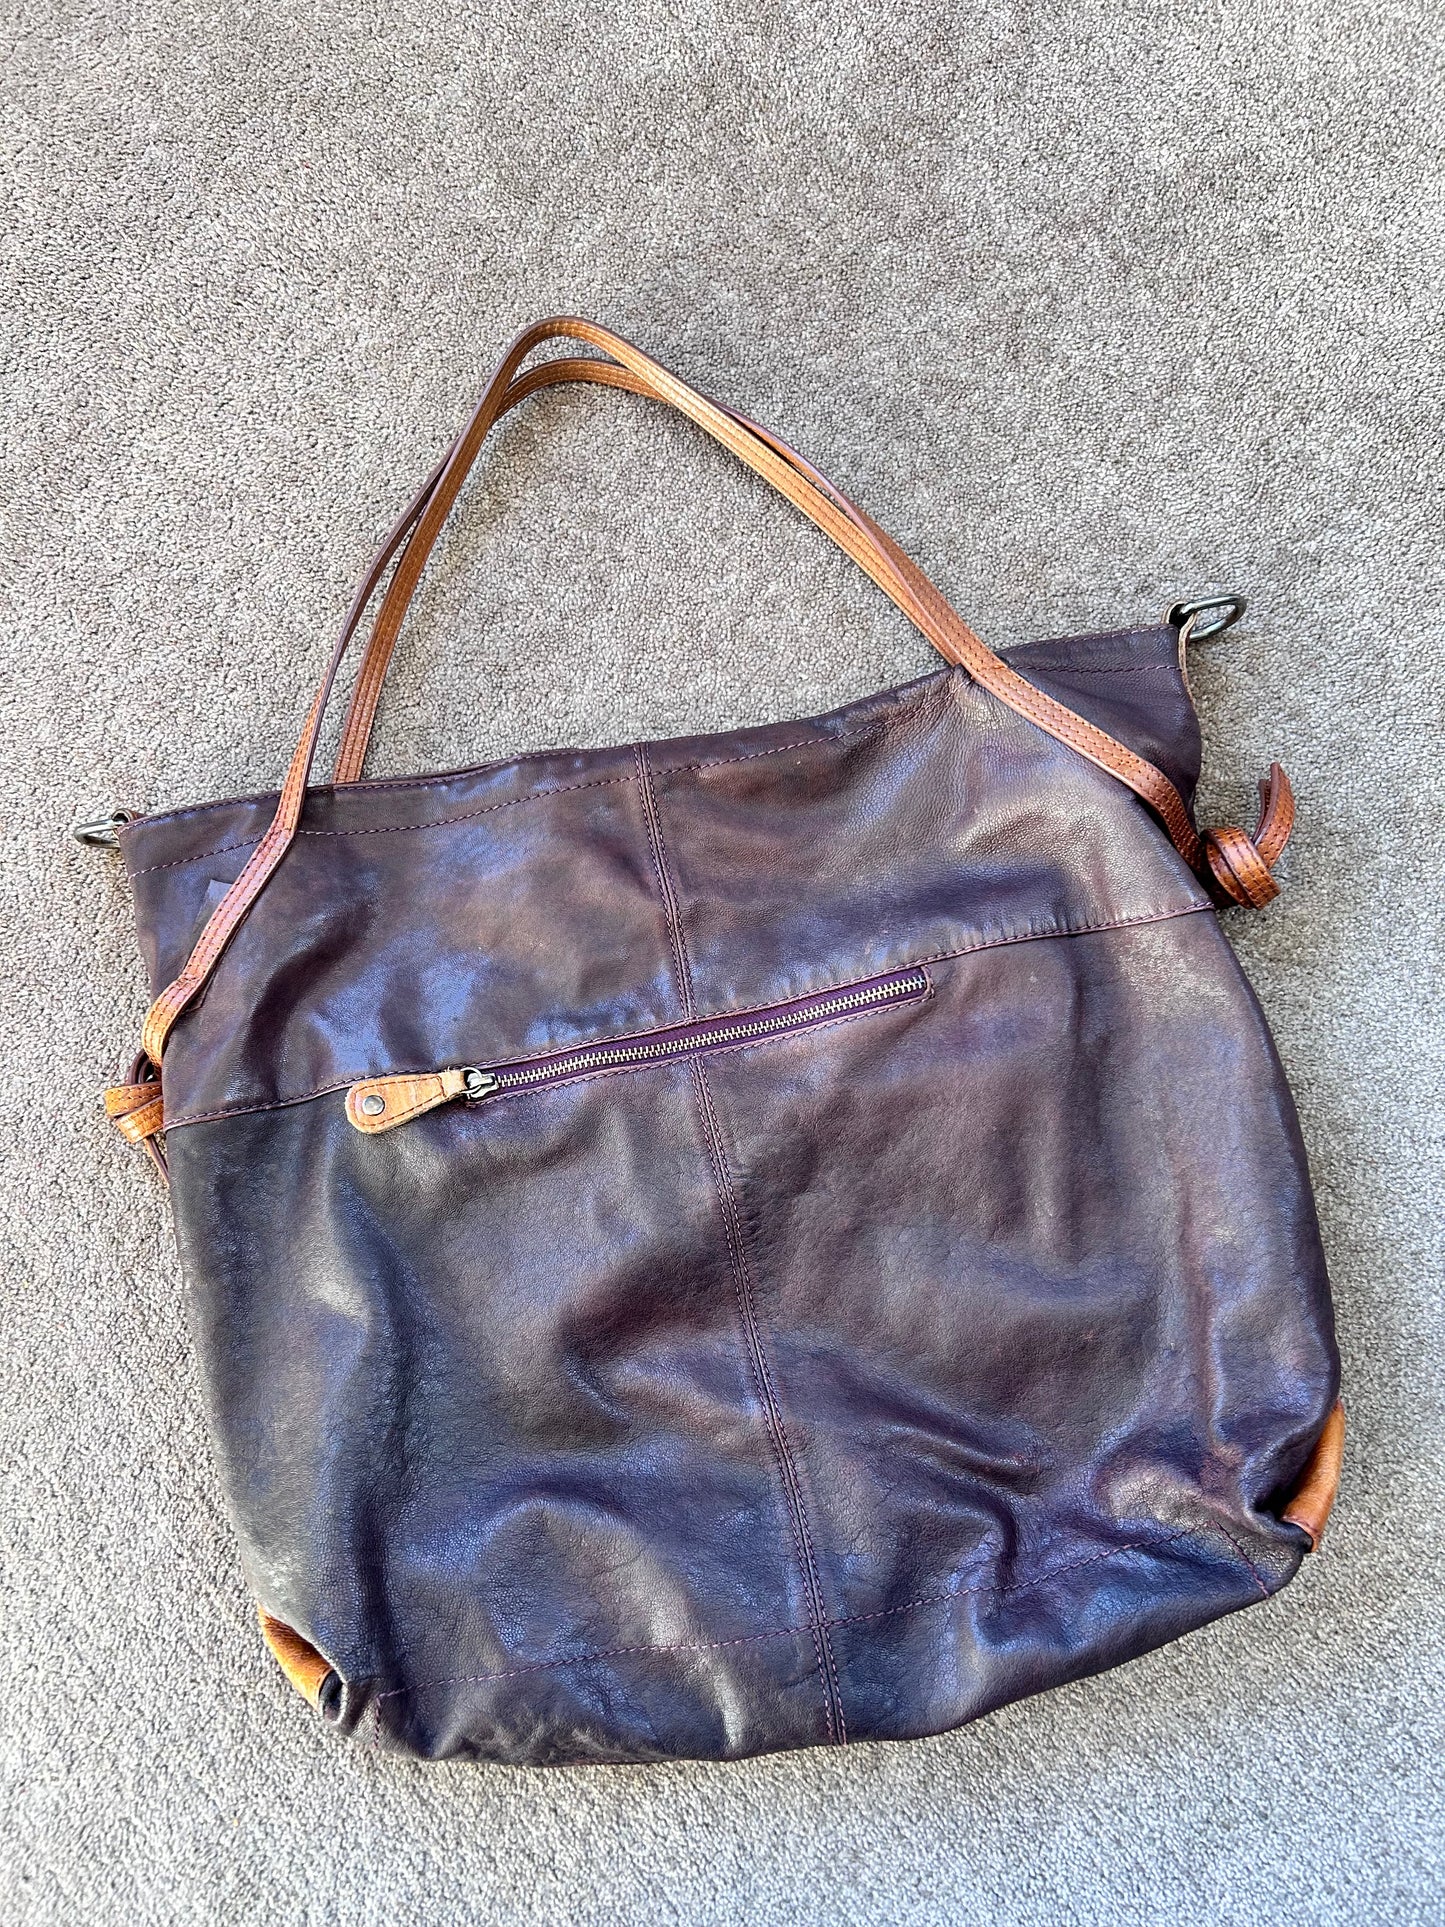 Marilyn Seyb, large leather tote bag